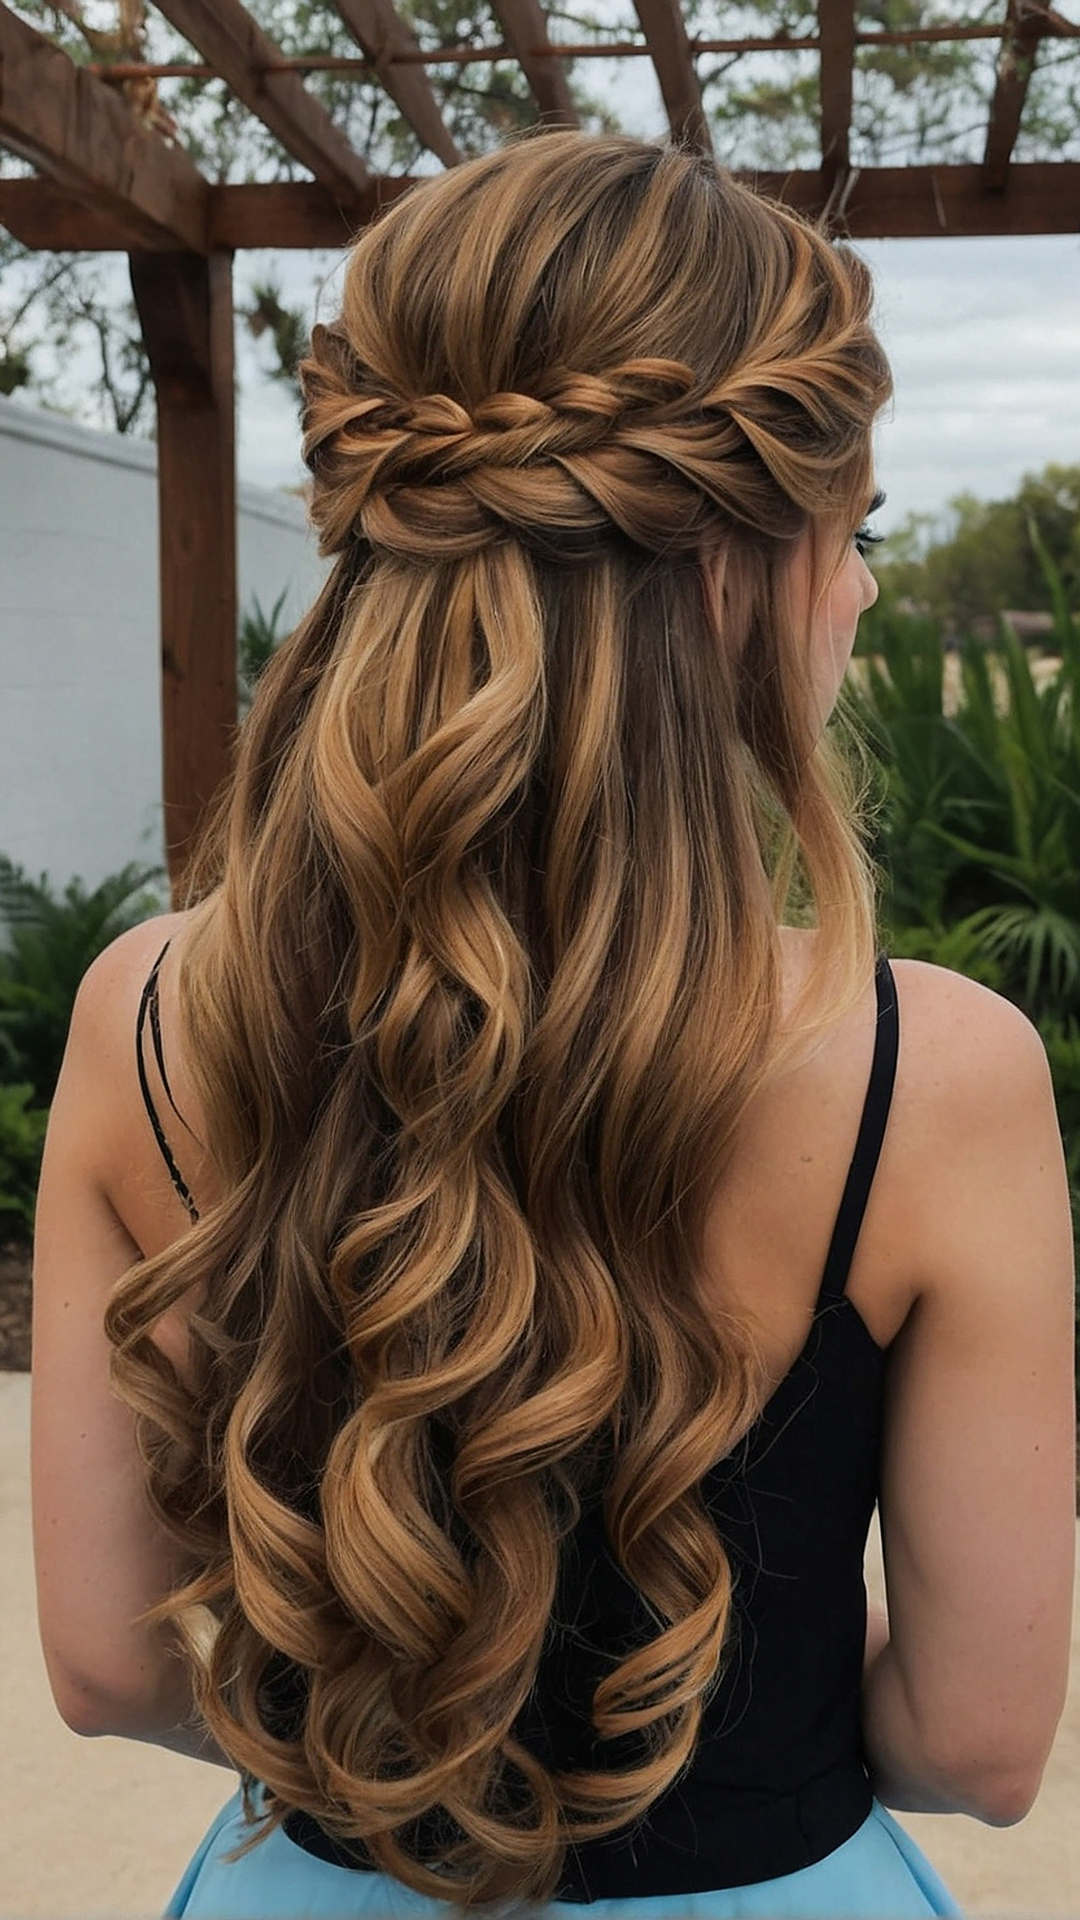 Boho Twists and Curls: Unique Prom Hairstyle